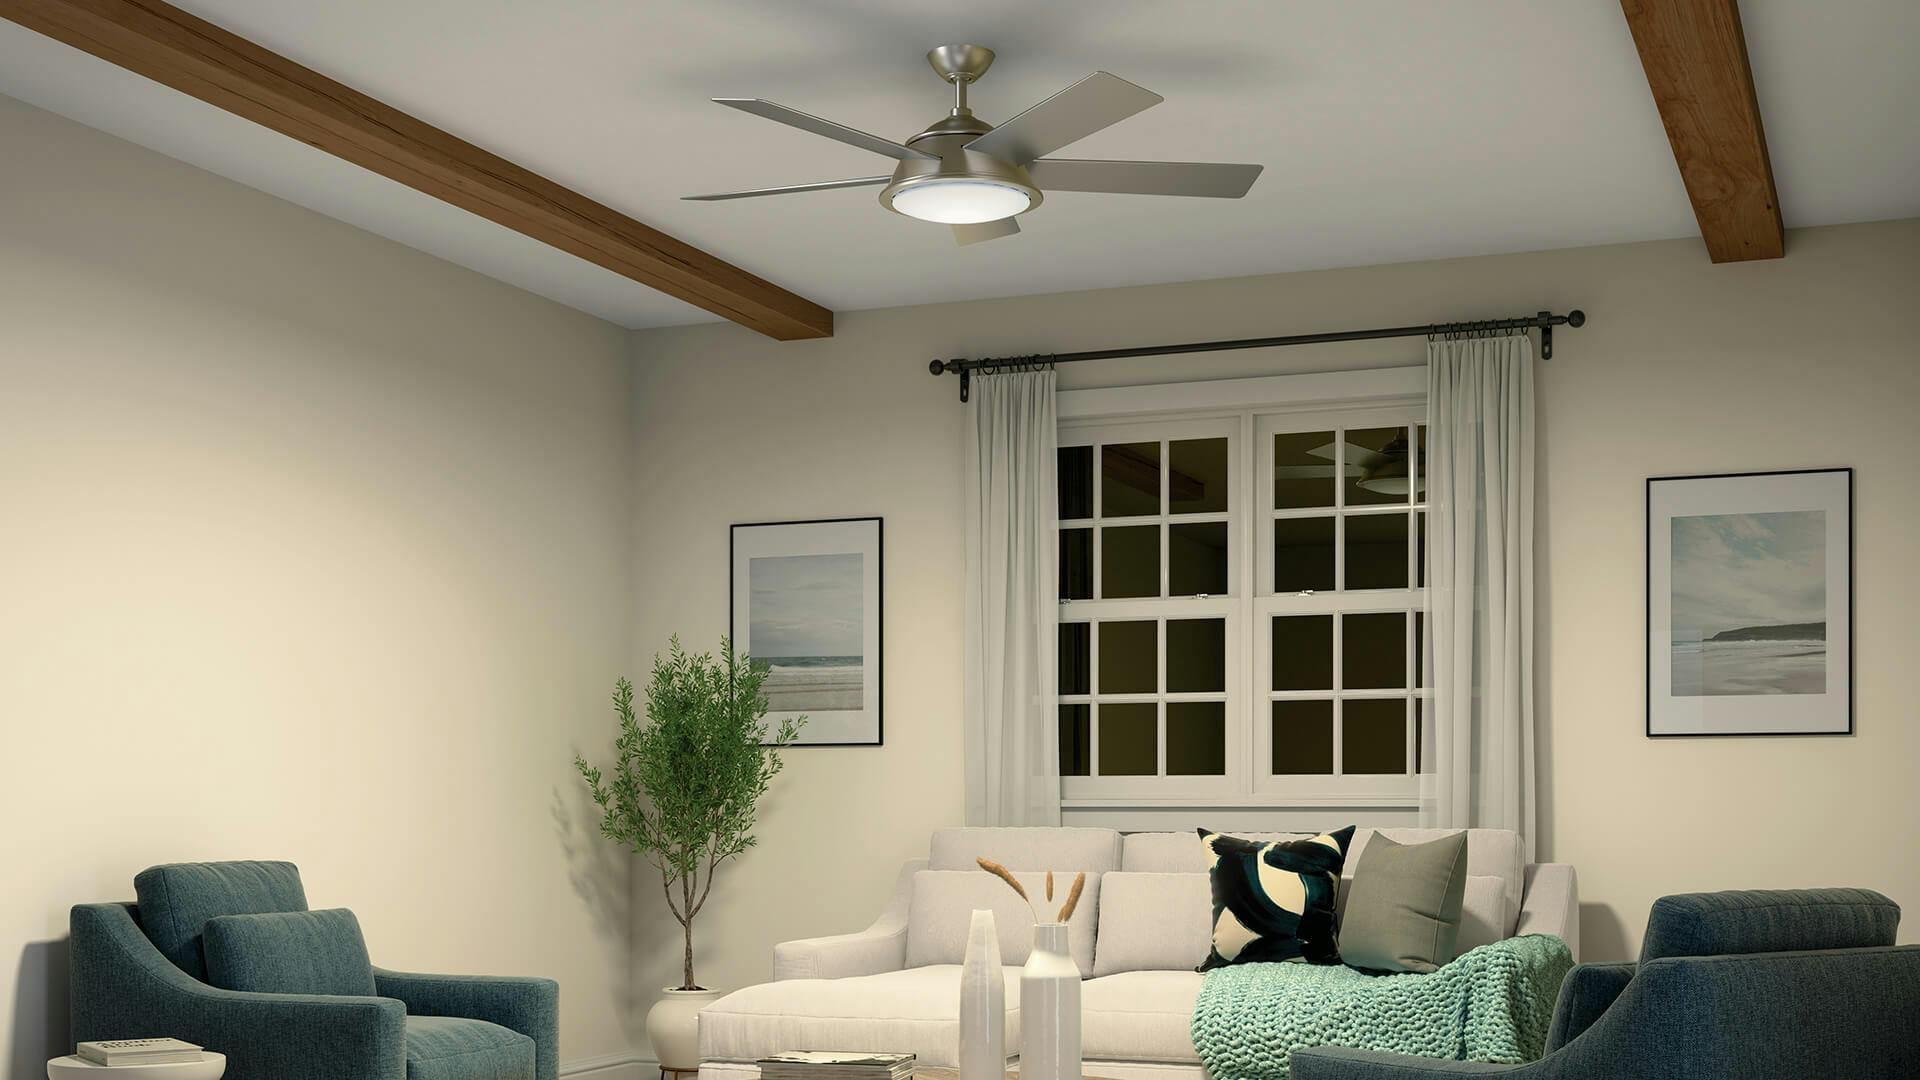 Living room at night featuring a Verdi ceiling fan lit against a white ceiling with wooden beams running along each side of it